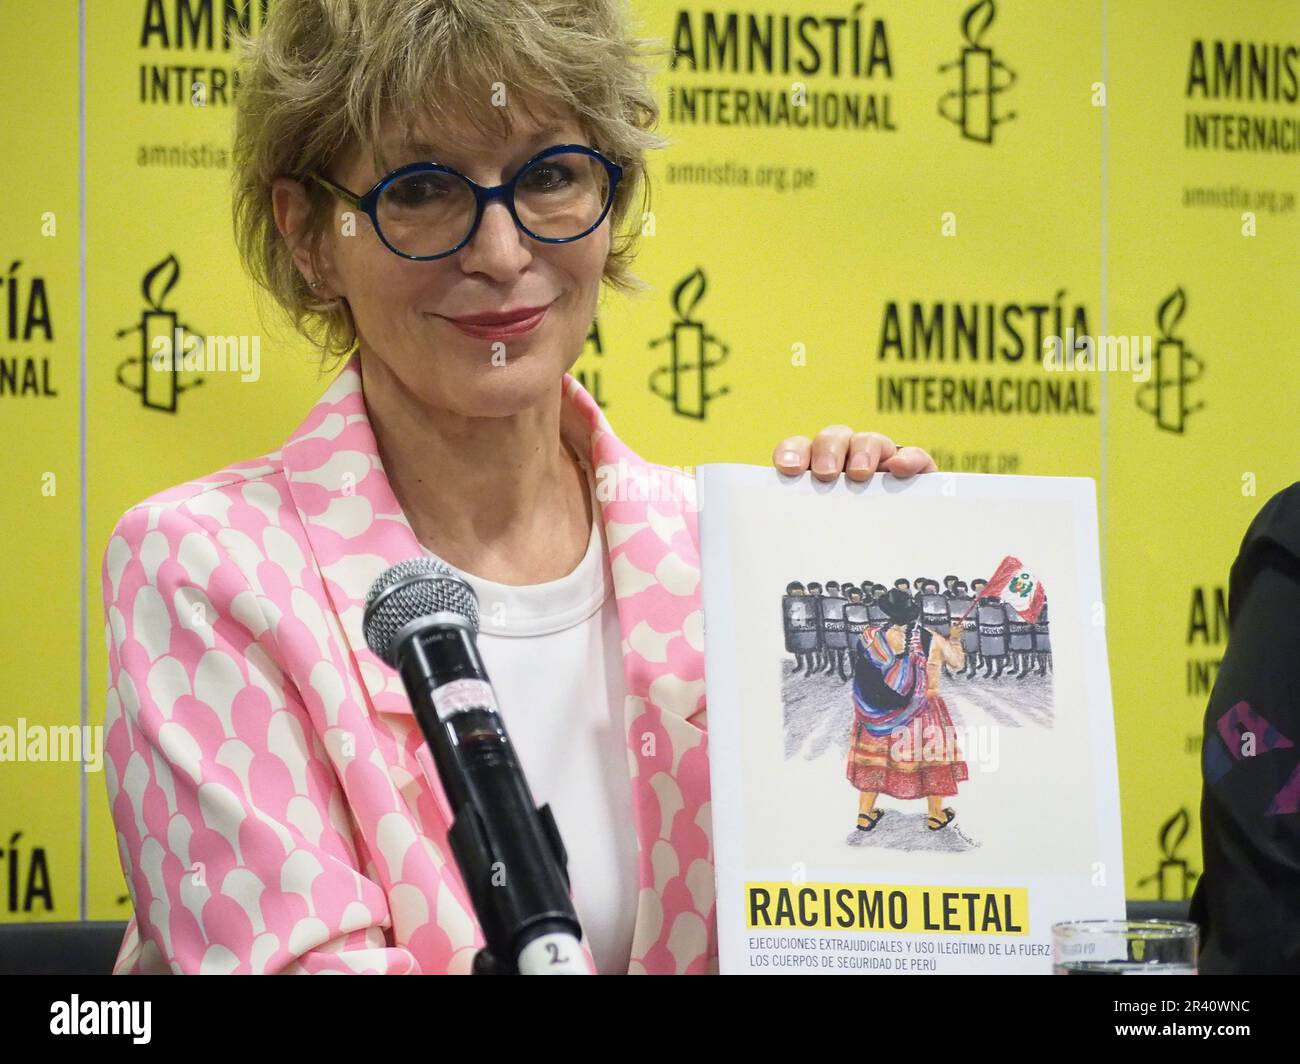 Agnes Callamard, Secretary General of Amnesty International, presenting the report 'Lethal racism: Extrajudicial executions and unlawful use of force by Peru’s security forces', referring to the victims in the protests that took place in Peru between December 2022 and February 2023. Stock Photo